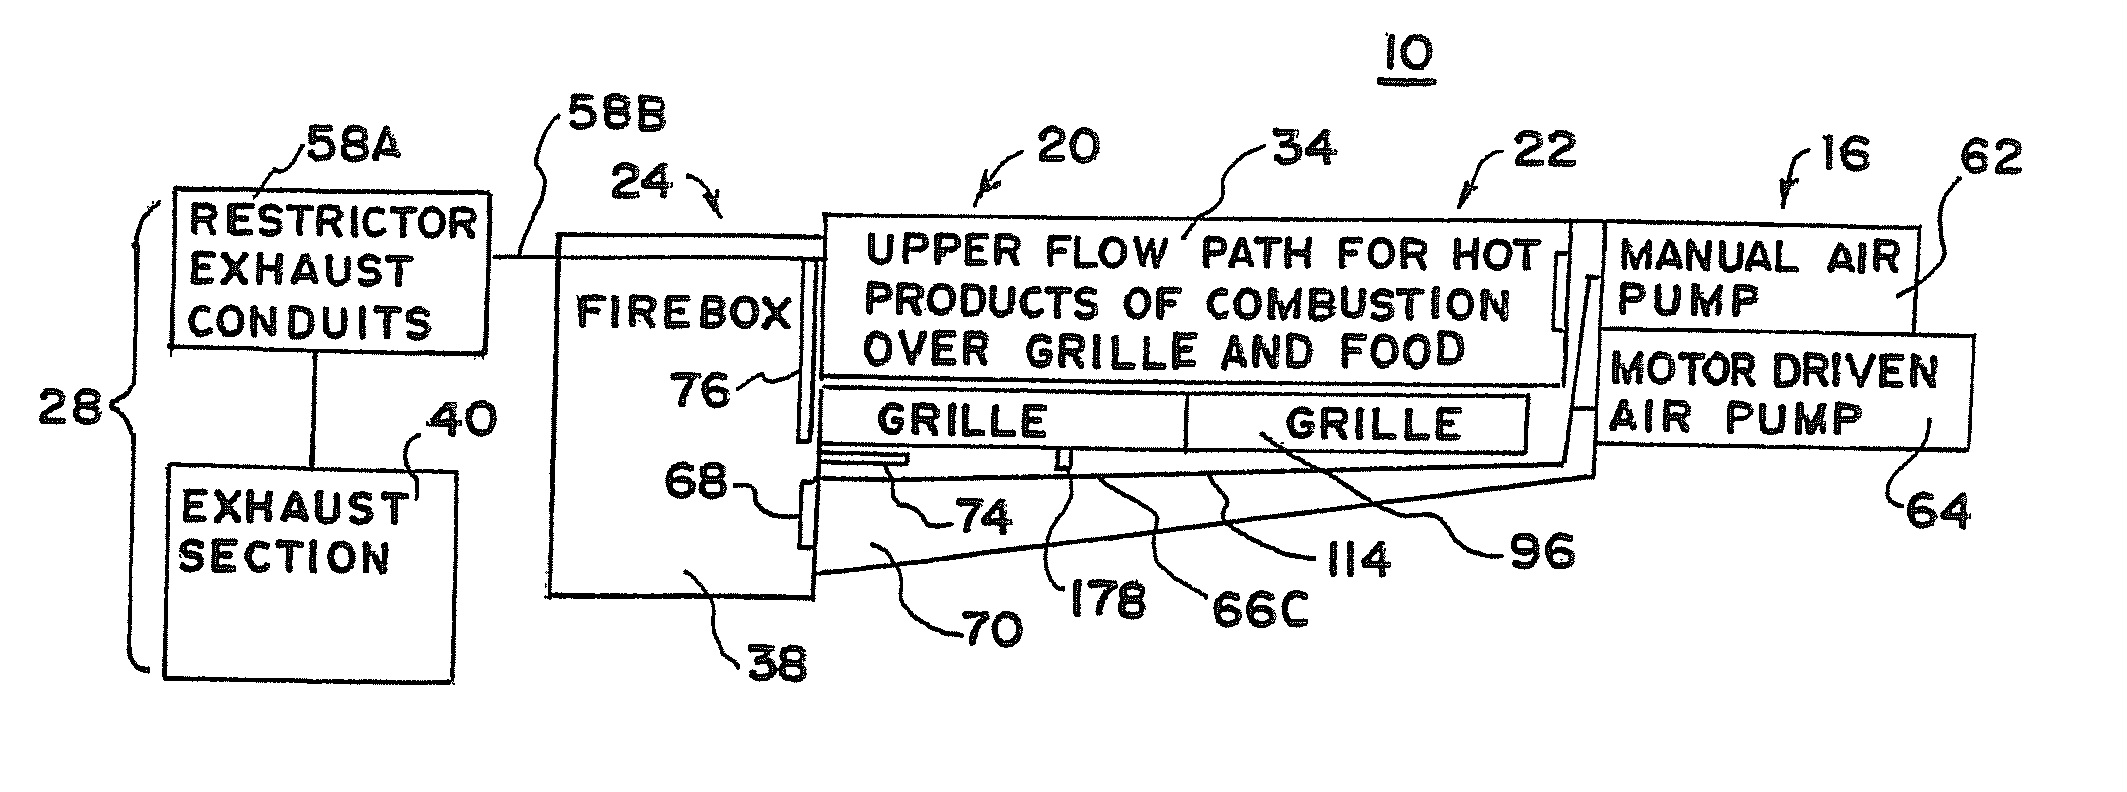 Meat treatment apparatus and method